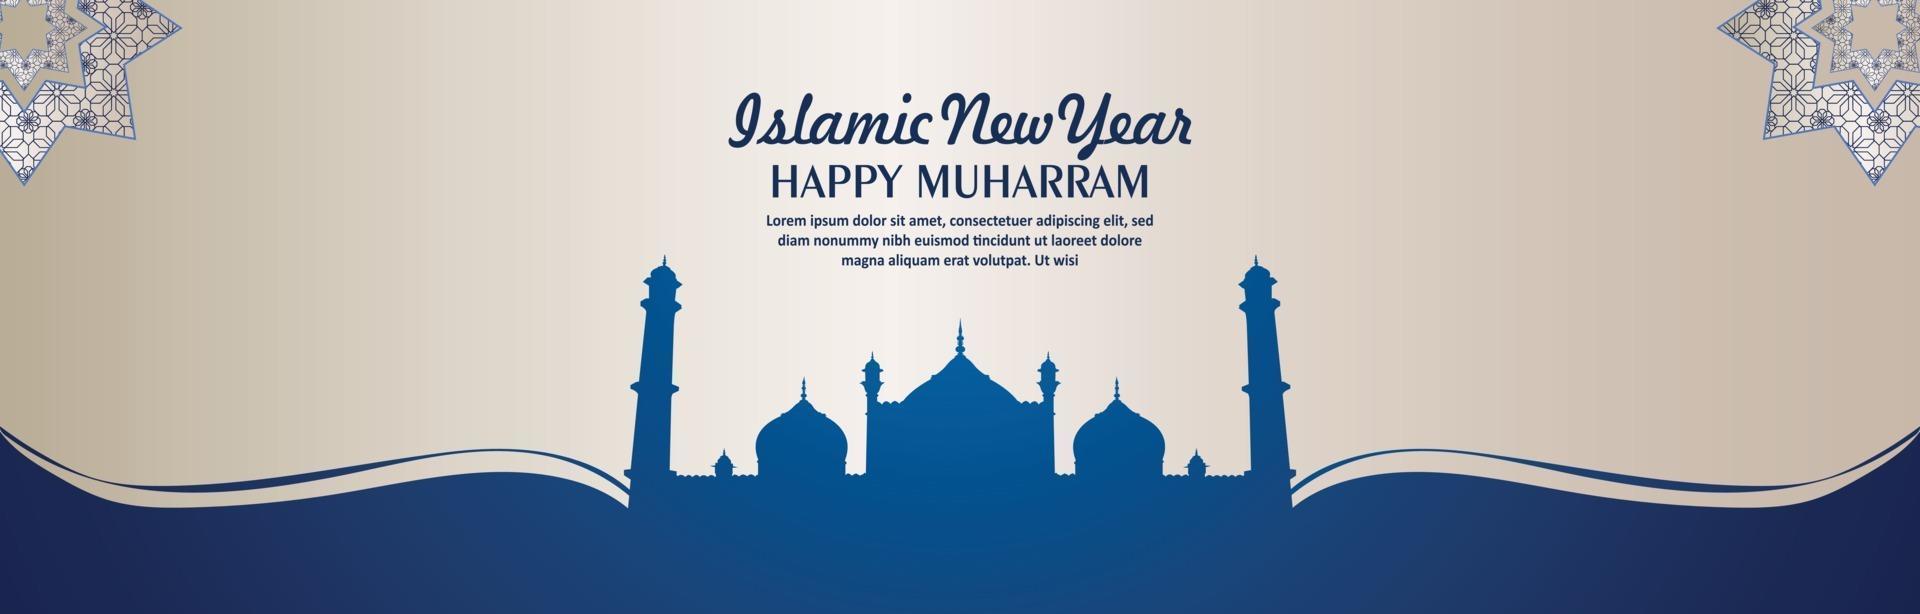 Islamic new year happy muharram banner or header with flat mosque vector